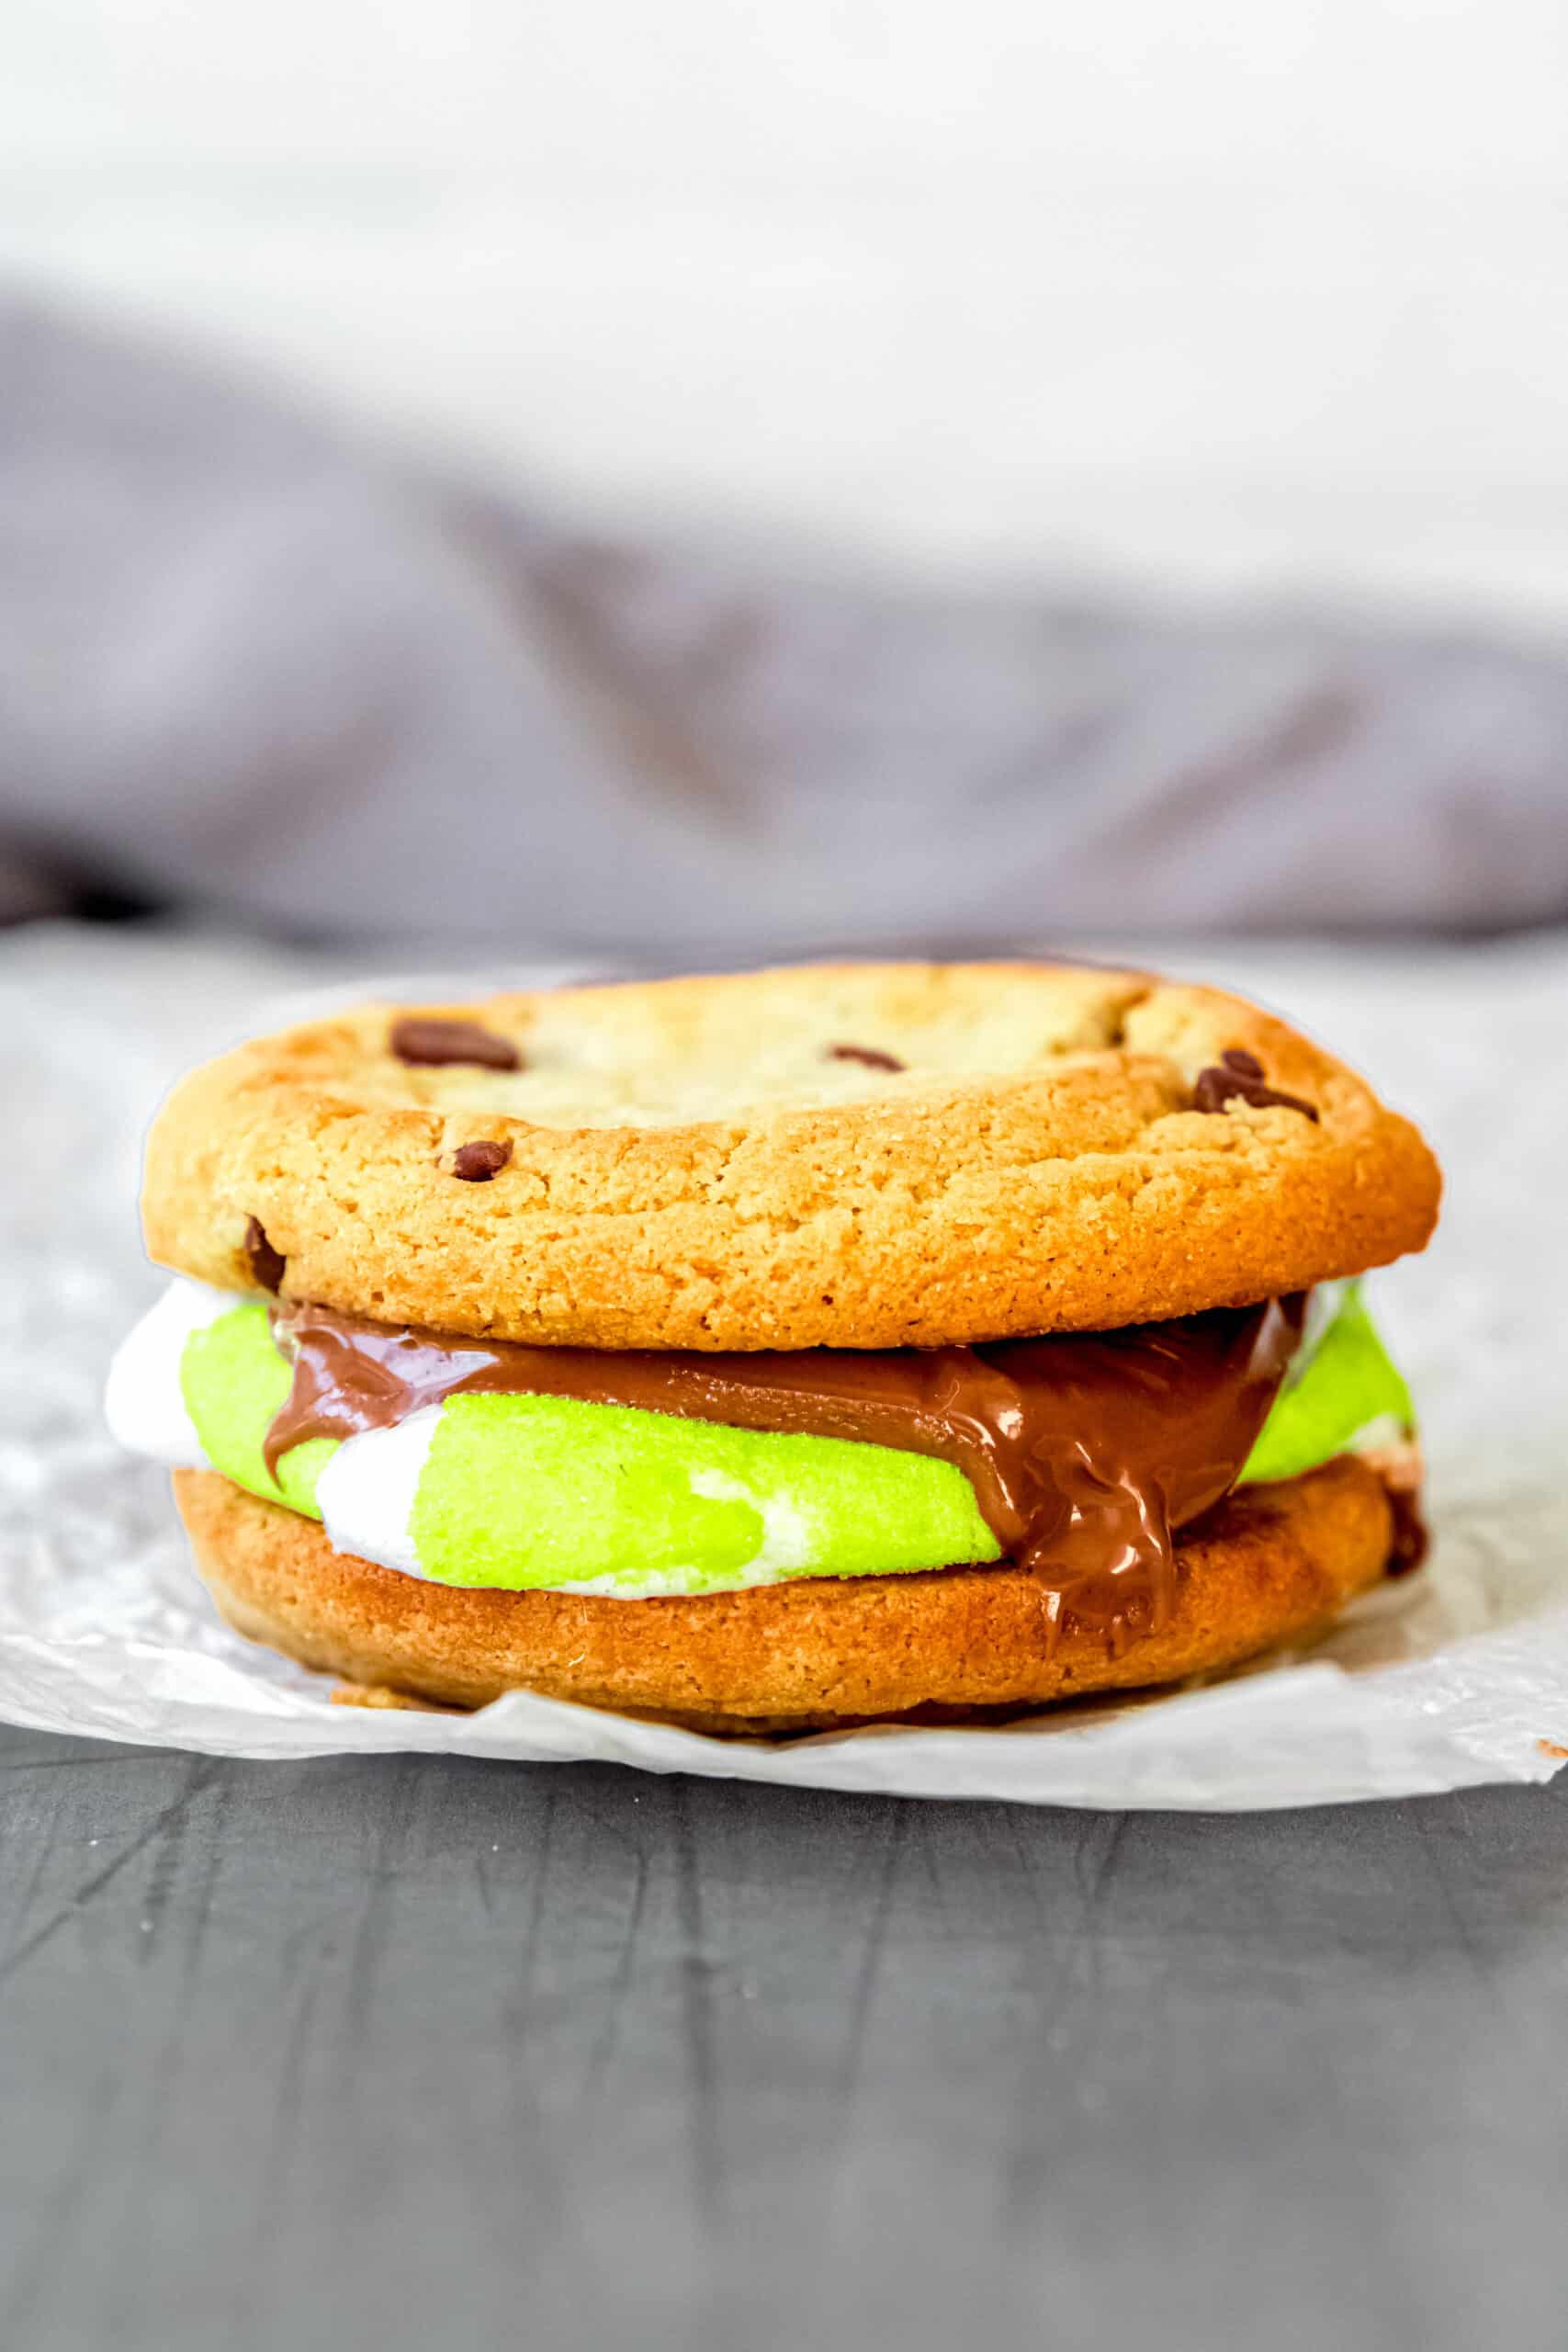 s'more made with a green halloween peep and melted chocolate peanut butter cup sandwiched between two chocolate chip cookies.